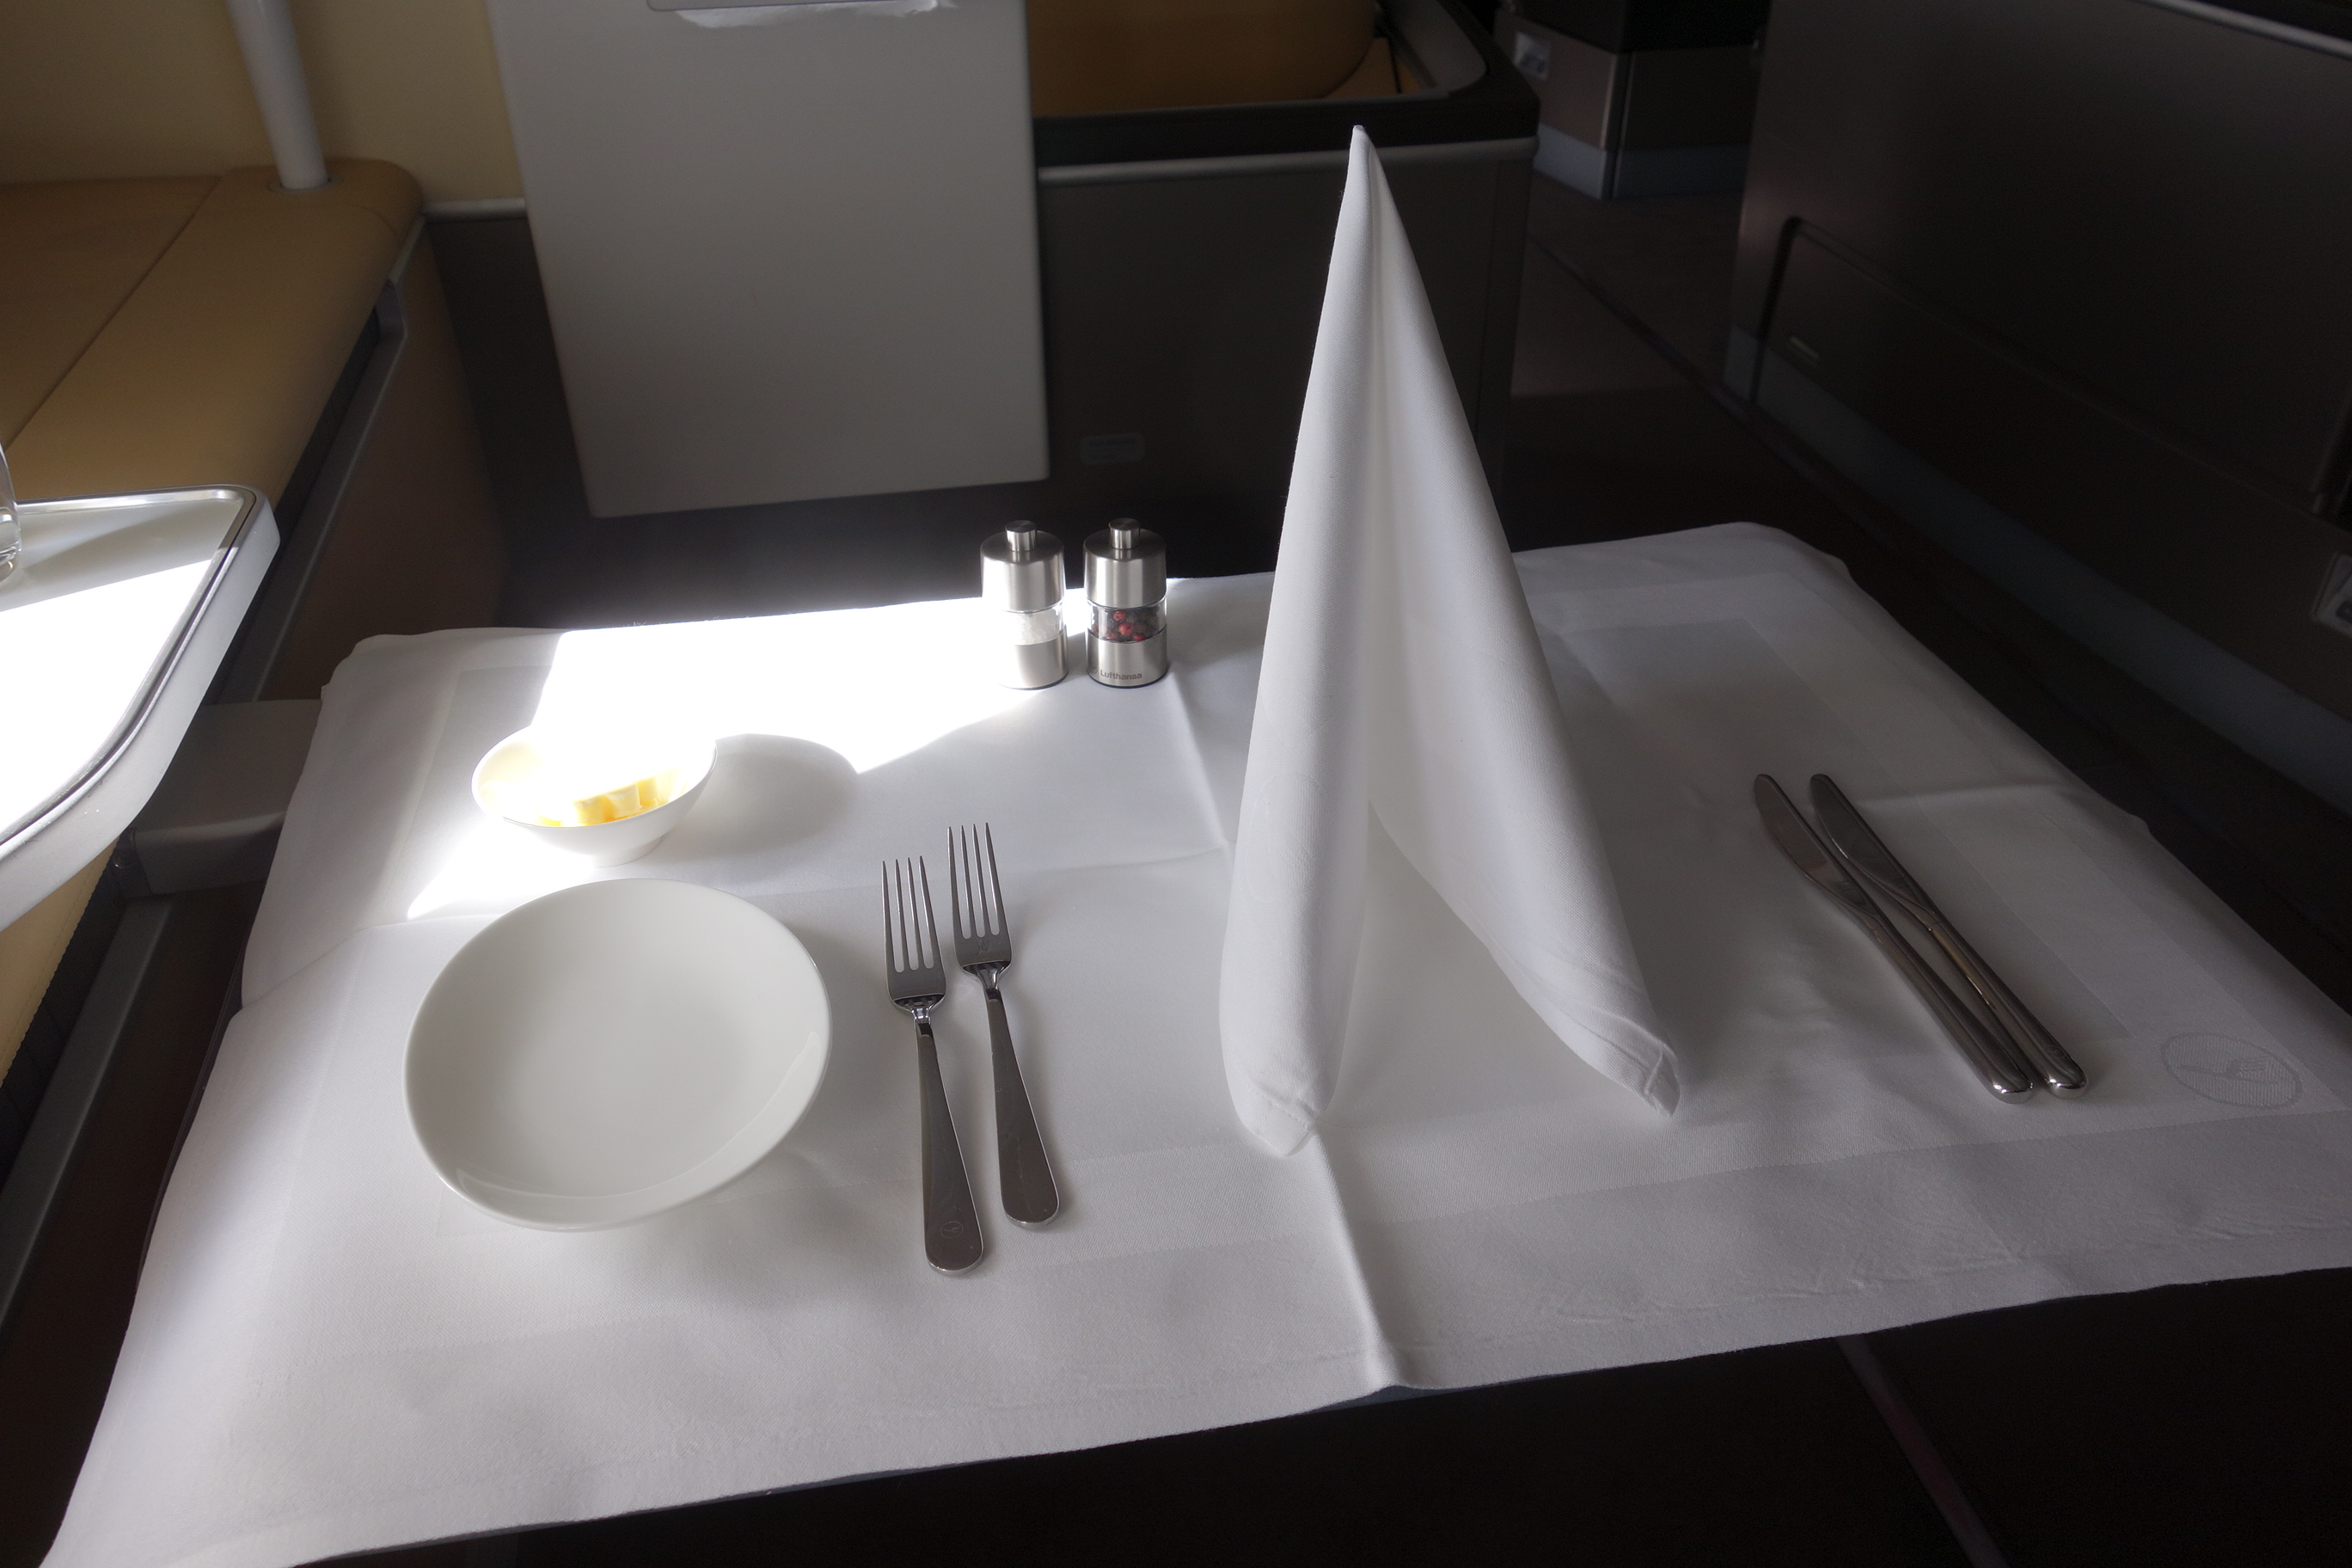 Table setting for the first meal service